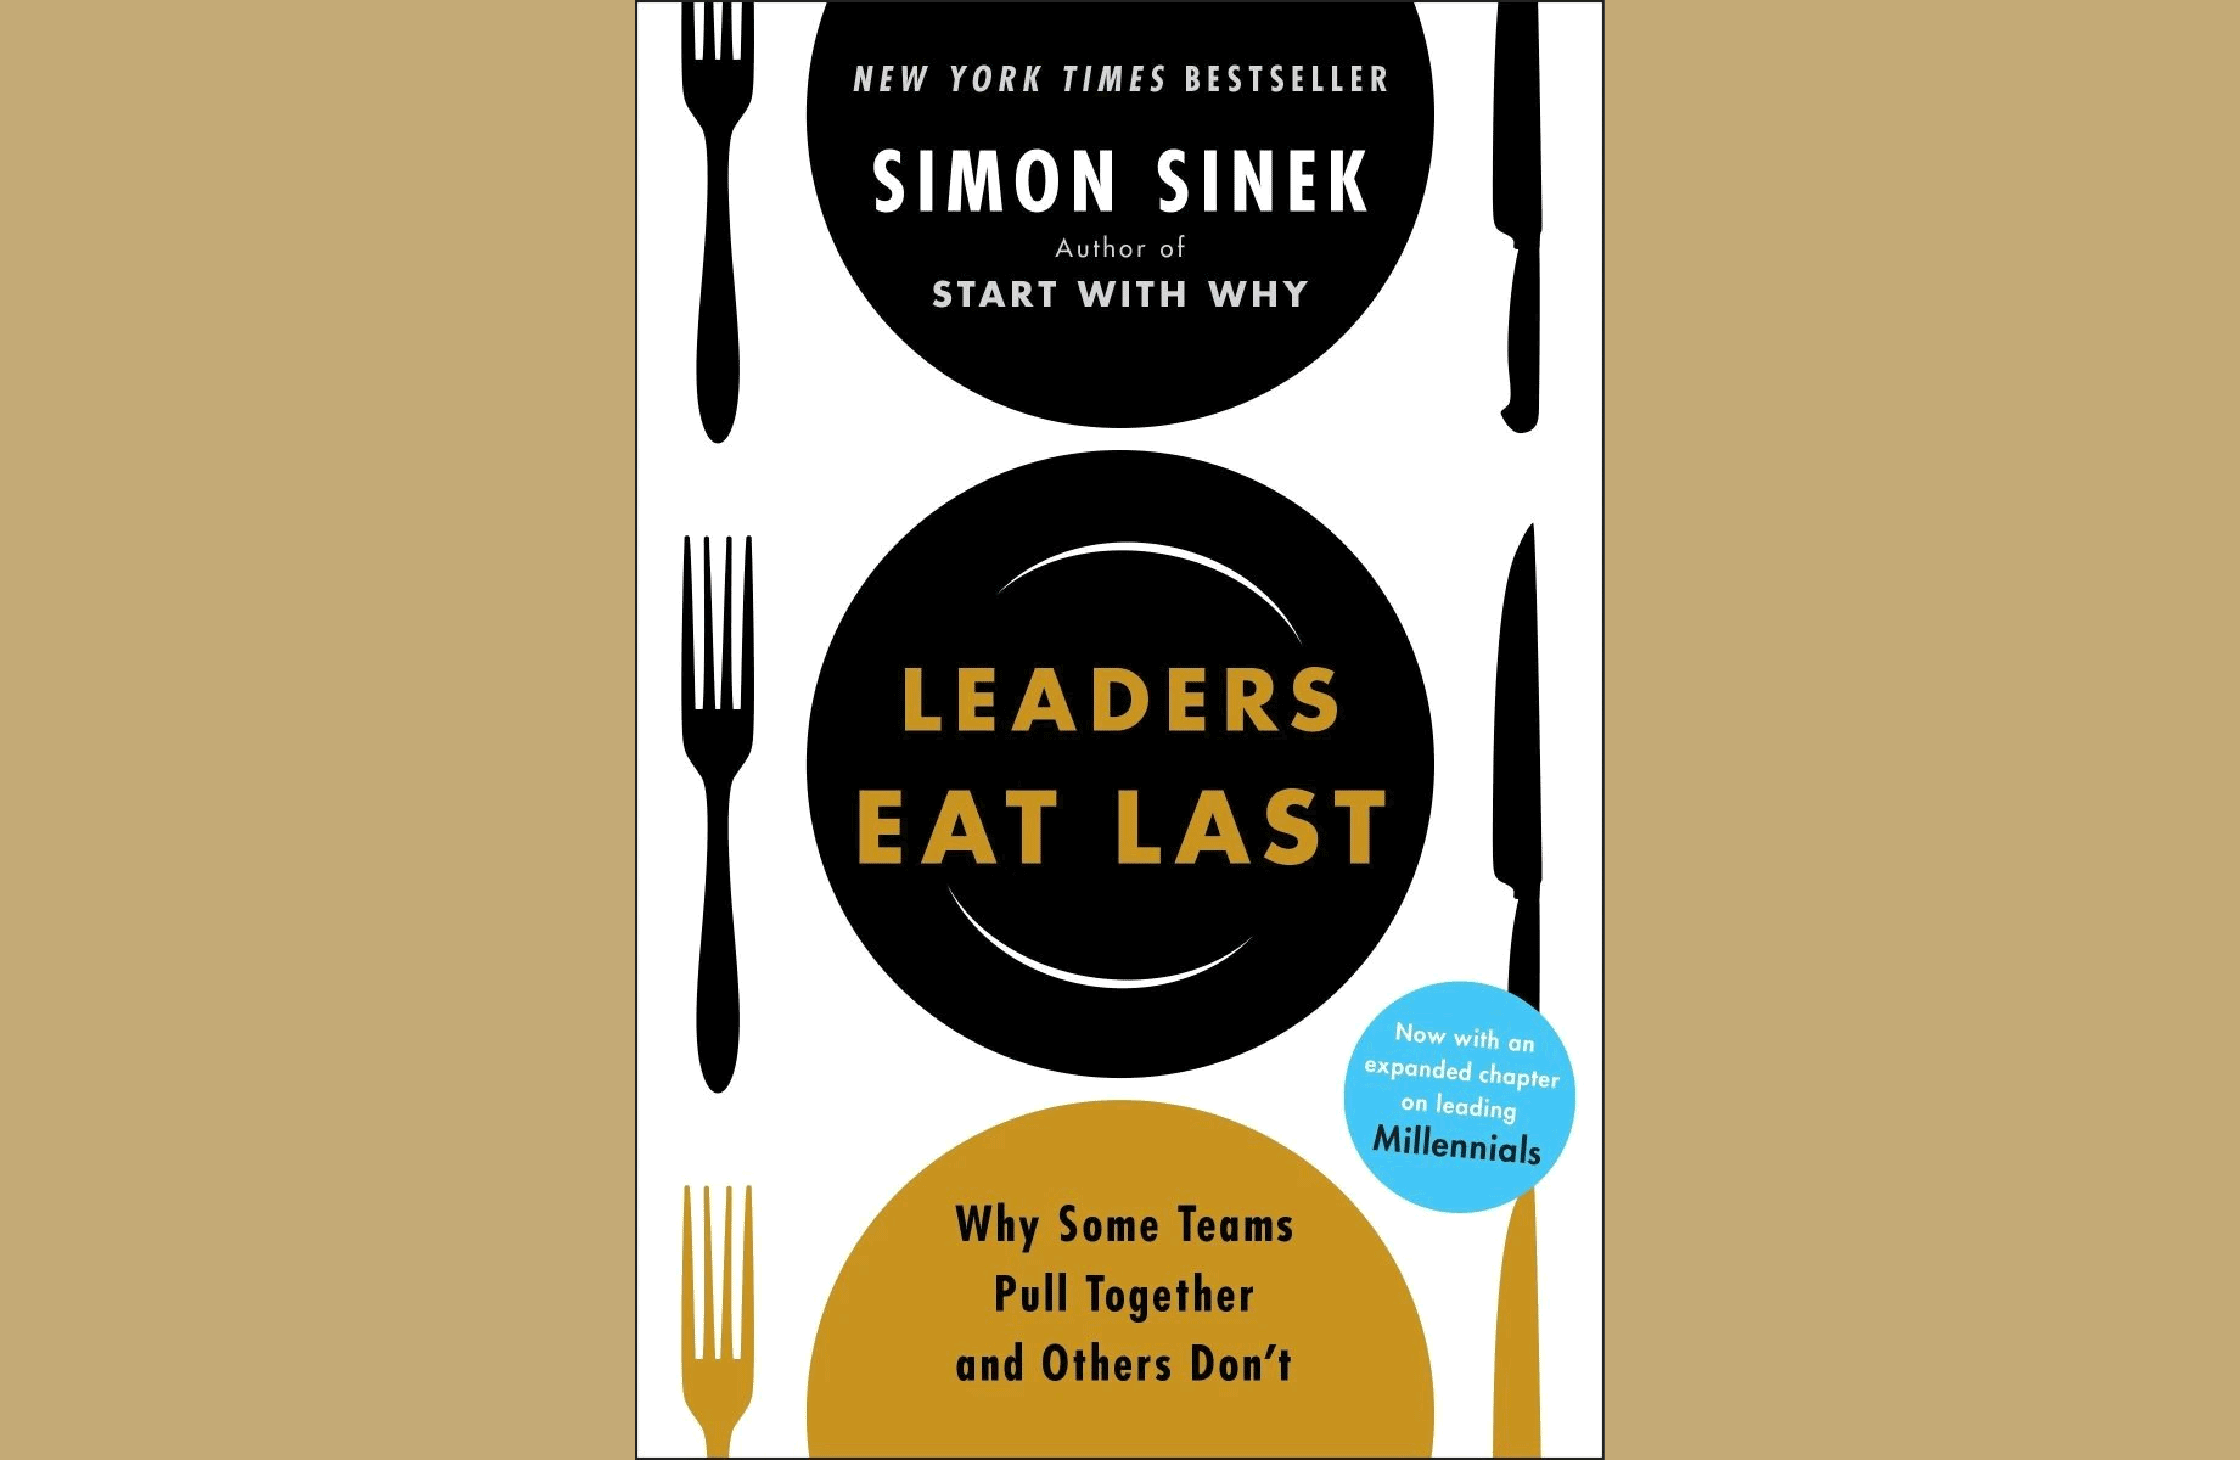 Summary: Leaders Eat Last: Why Some Teams Pull Together, and Others Don't by Simon Sinek